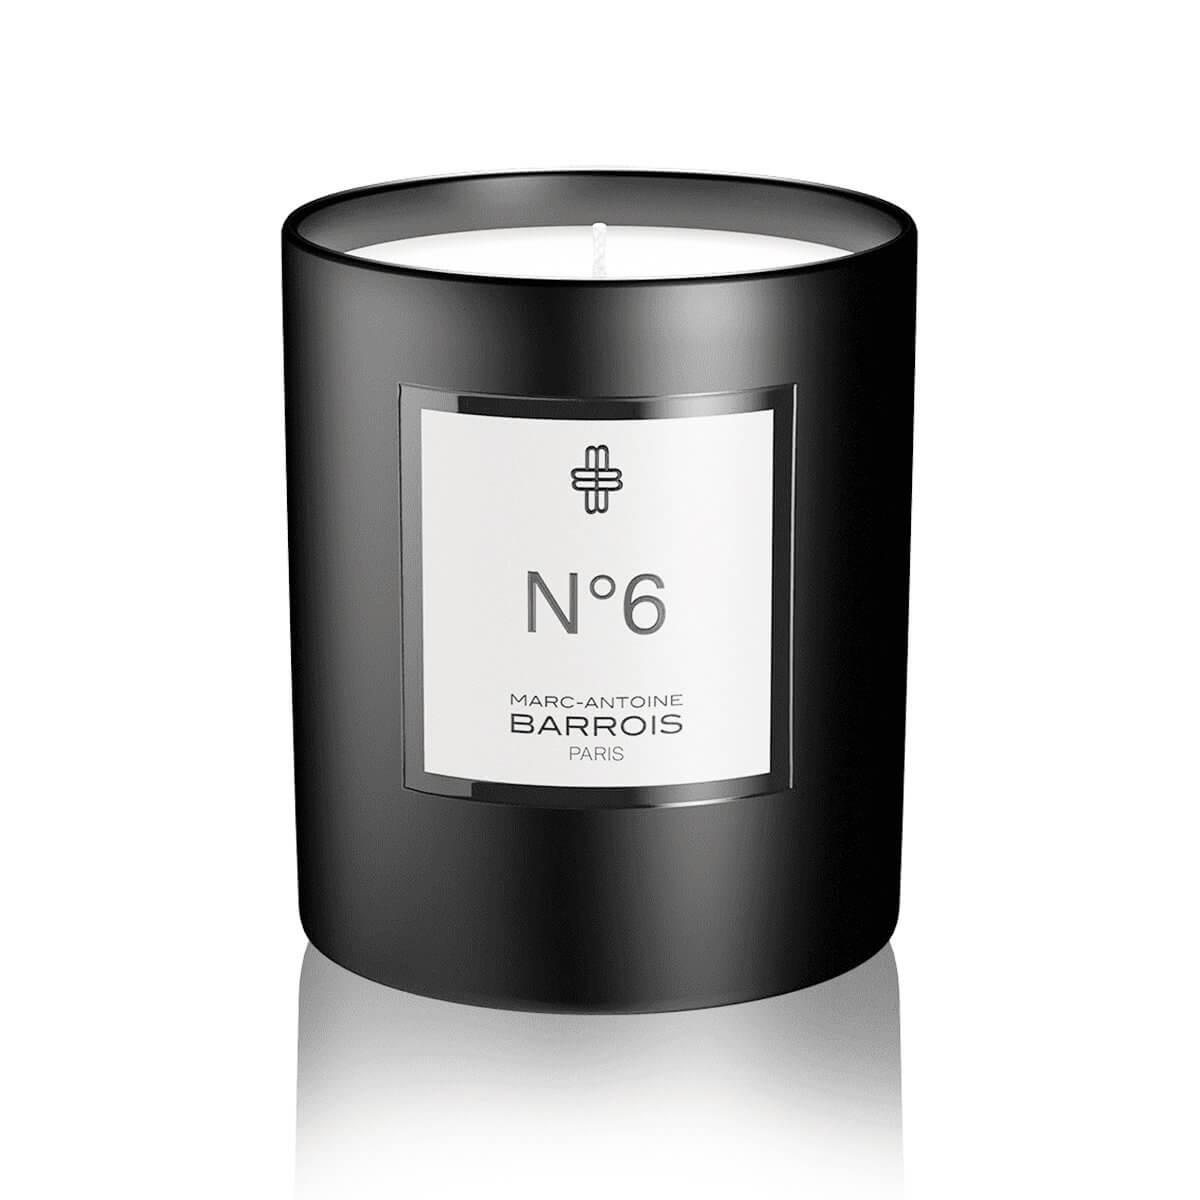 No 6 Scented Candle by Marc-Antoine Barrois at Indigo Perfumery